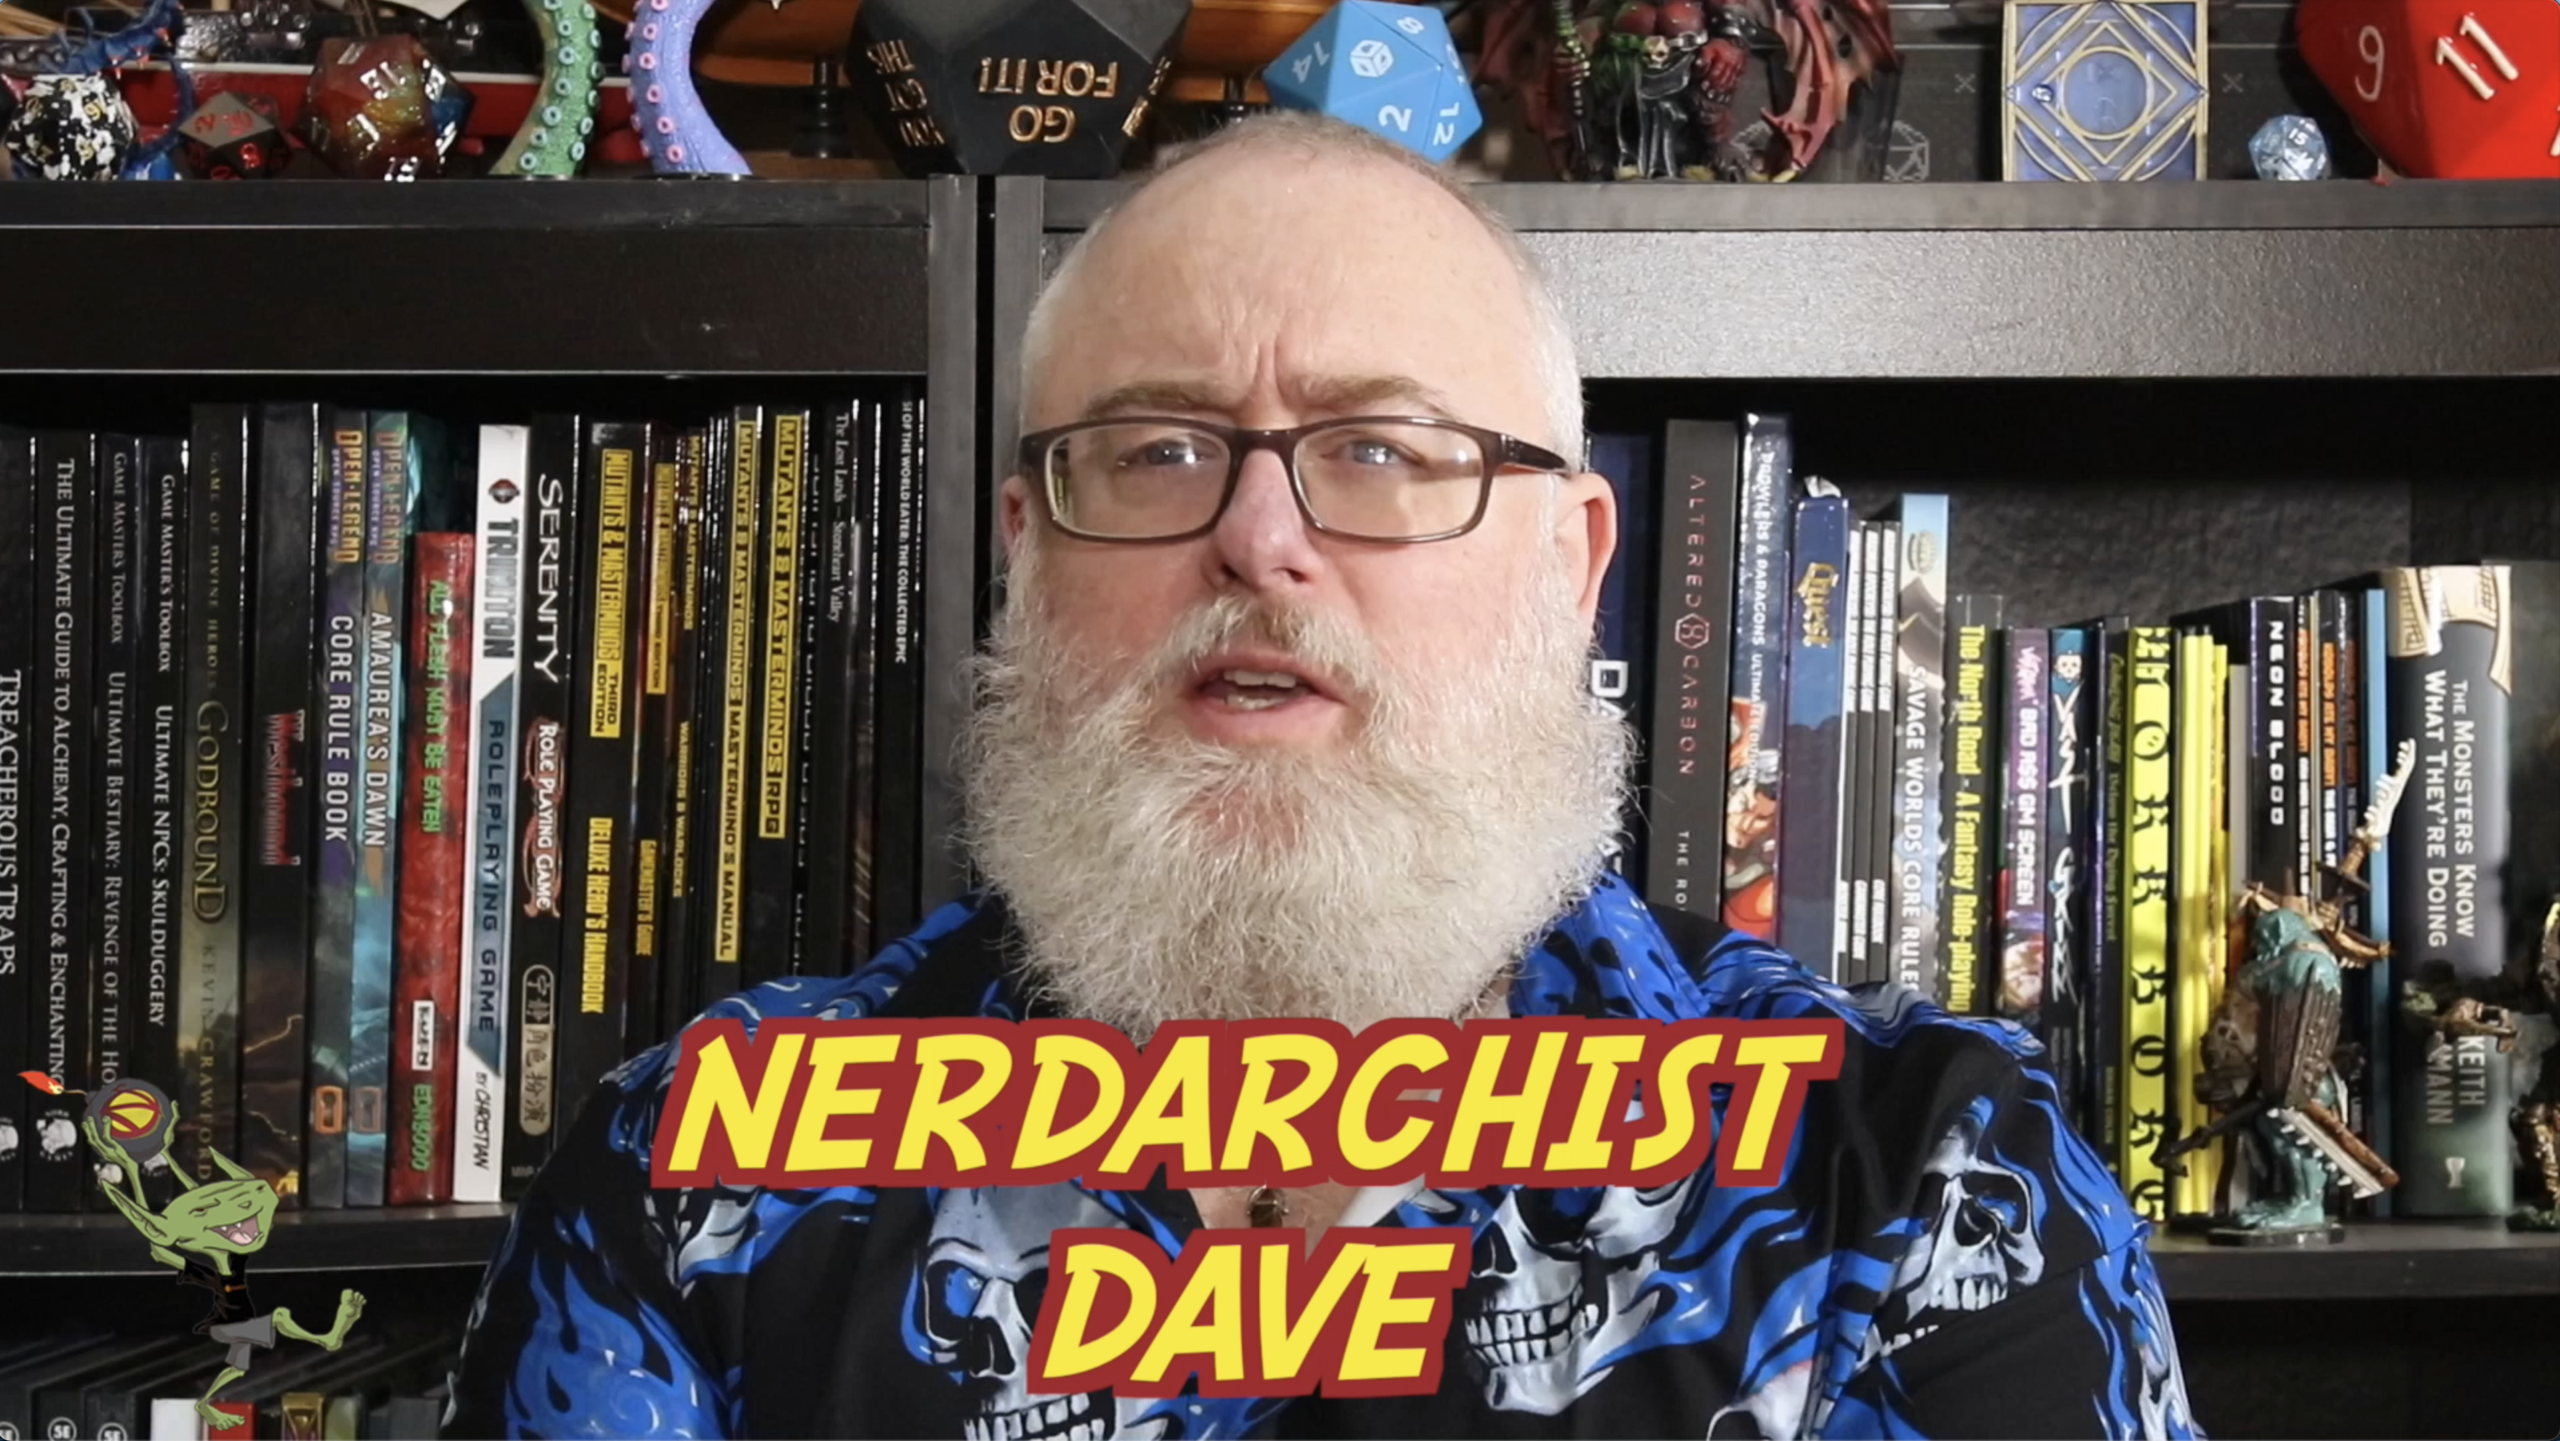 NERDARCHIST DAVE VIDEO AND EDITING